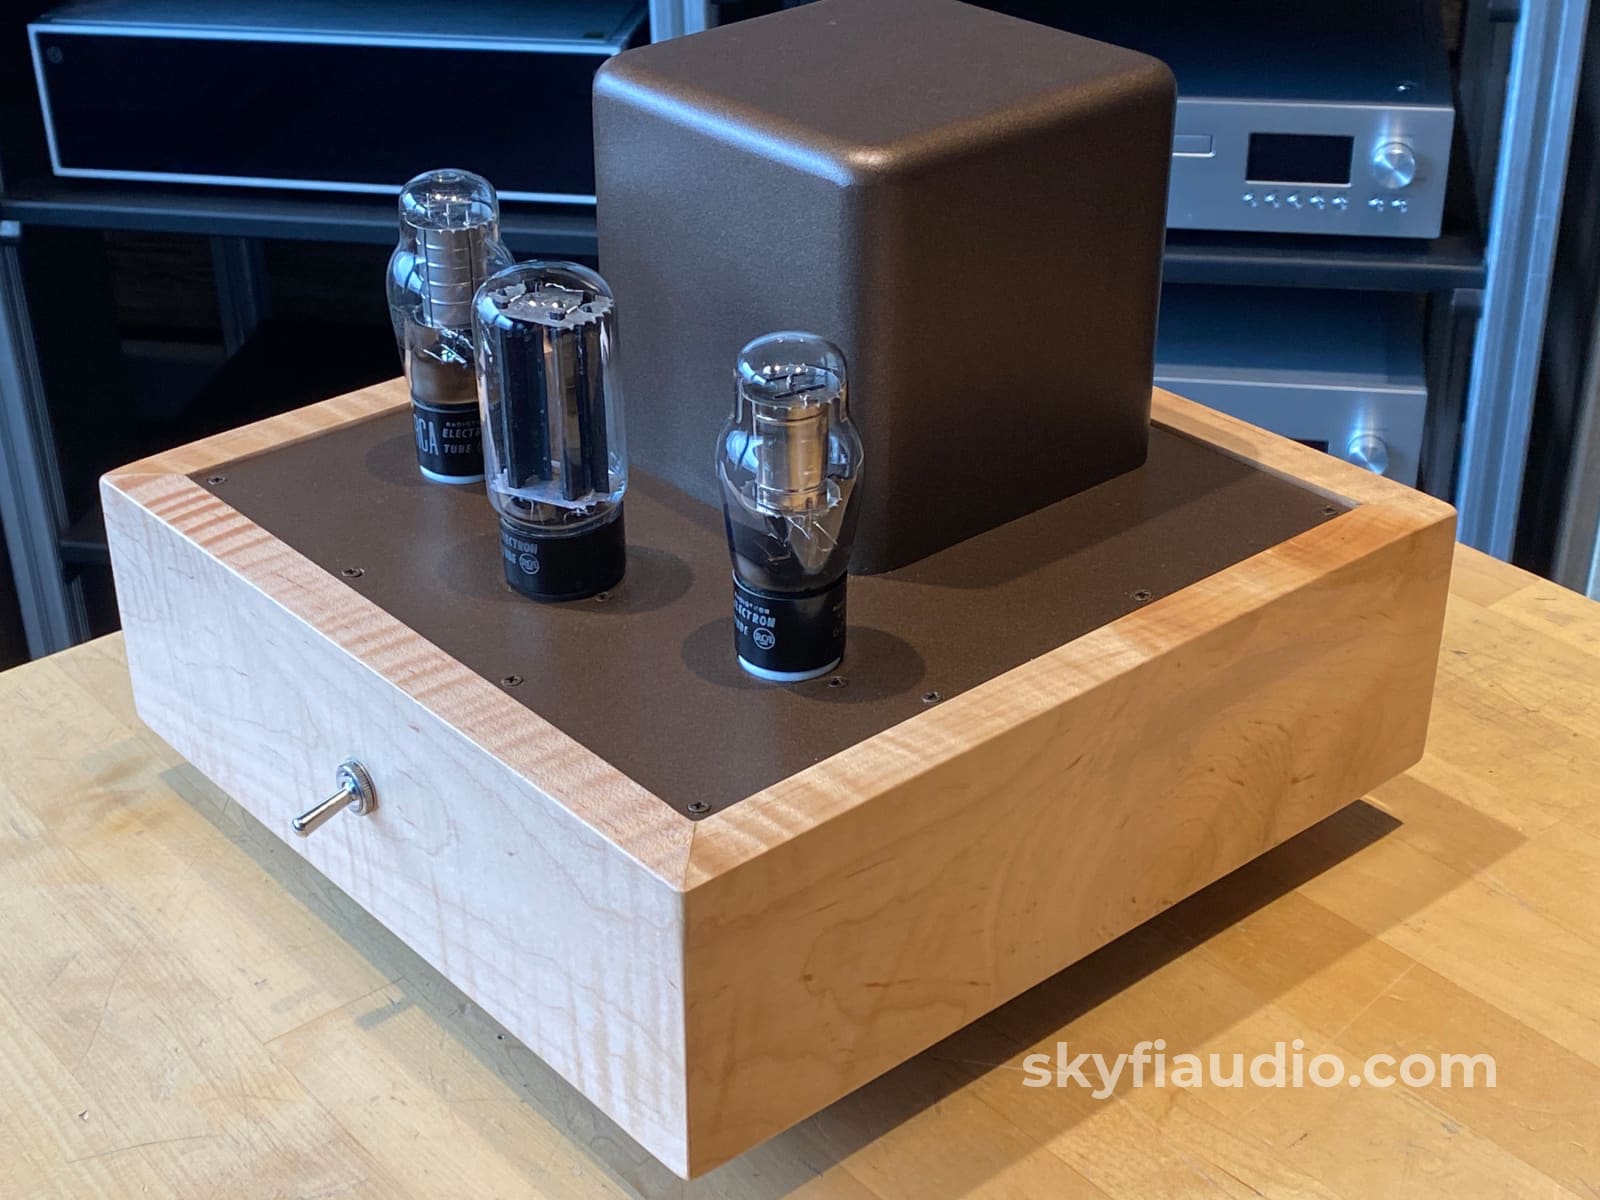 Aric Audio Motherlode Ii Tube Preamp In Custom Cabinet With Upgrades Preamplifier